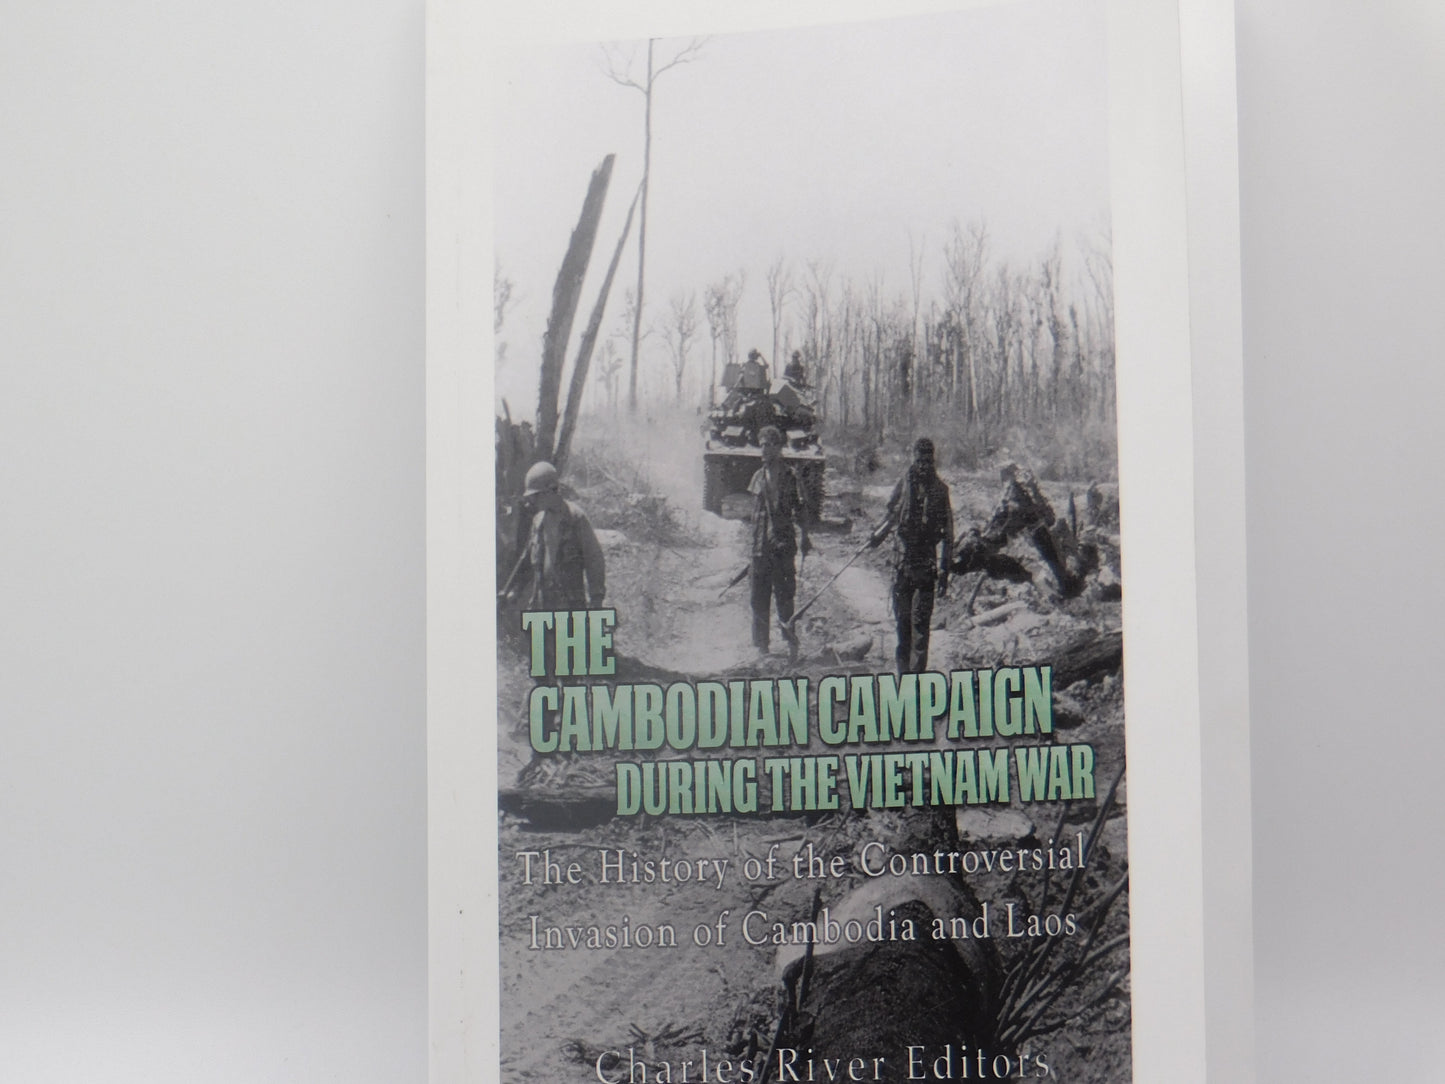 The Cambodian Campaign During The Vietnam War by Charles River